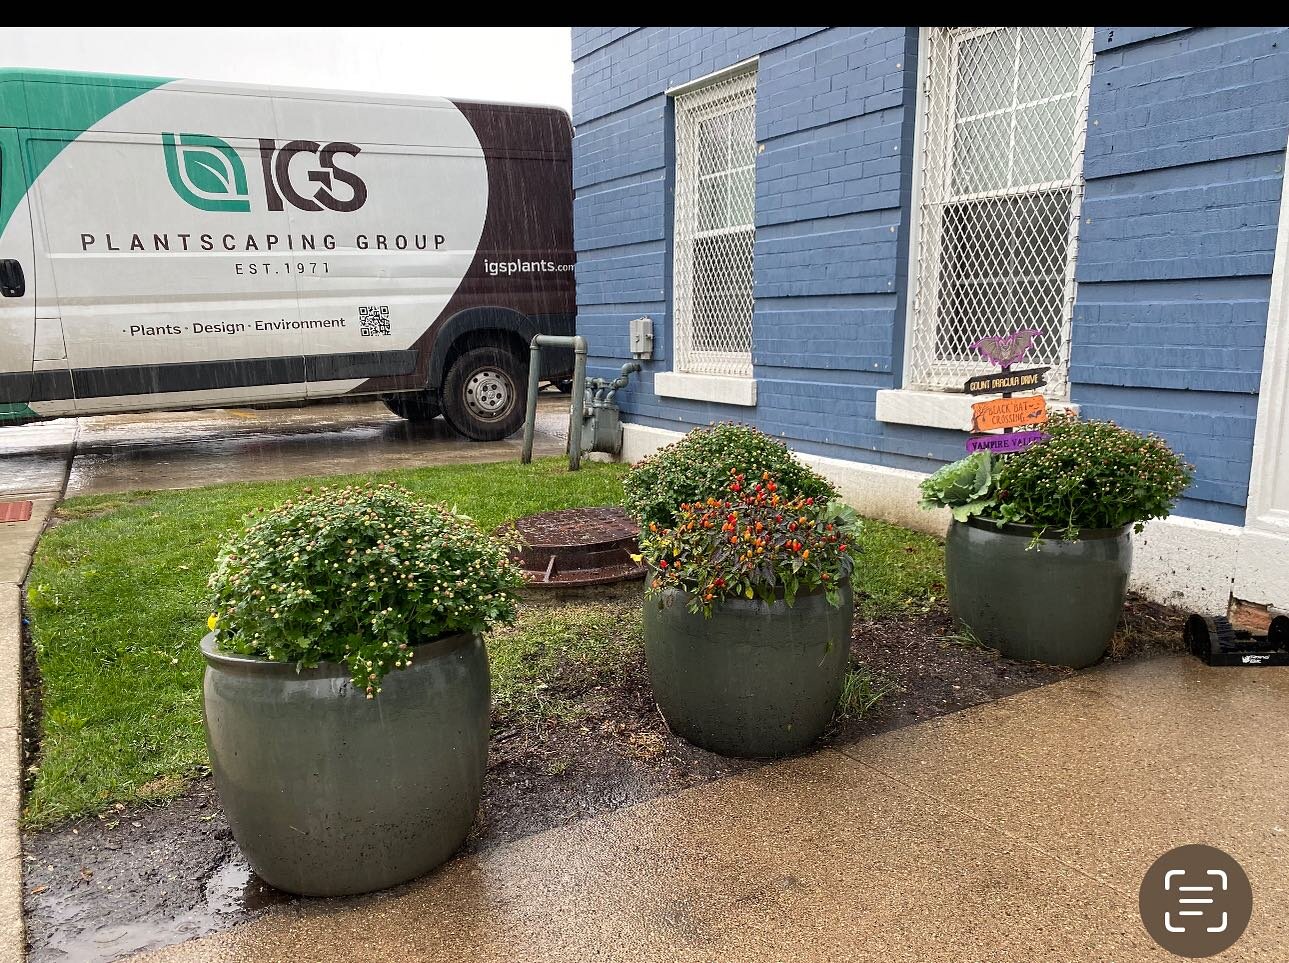 Simple fall containers about to pop.

#igs #truck #fallcontainers #fallmums #color